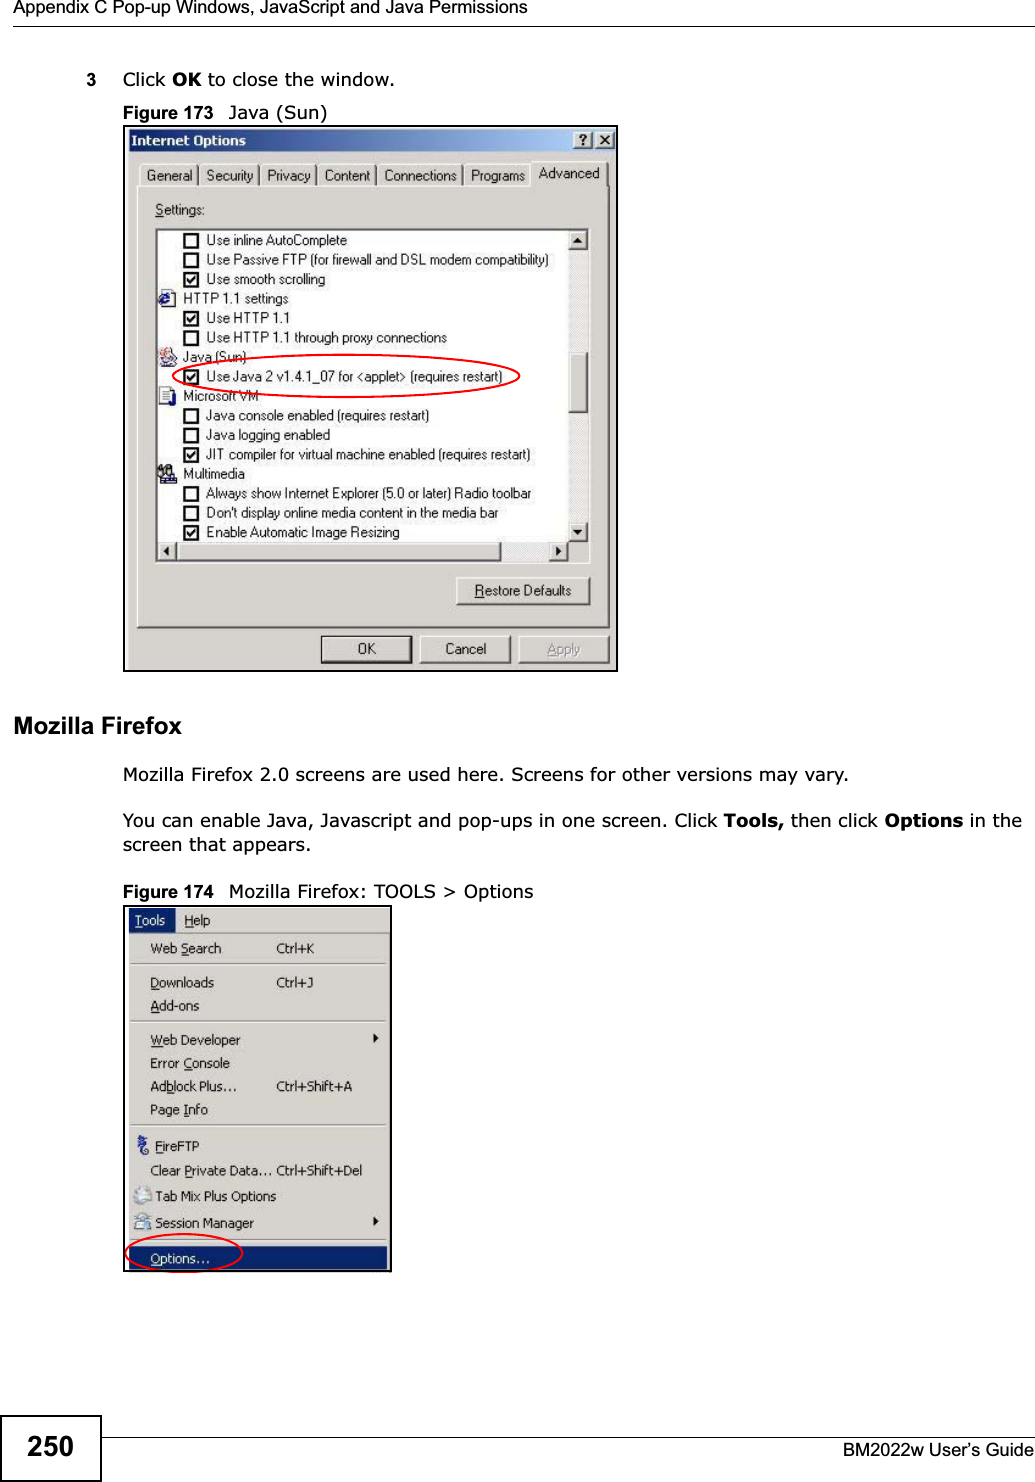 Appendix C Pop-up Windows, JavaScript and Java PermissionsBM2022w User’s Guide2503Click OK to close the window.Figure 173   Java (Sun)Mozilla FirefoxMozilla Firefox 2.0 screens are used here. Screens for other versions may vary. You can enable Java, Javascript and pop-ups in one screen. Click Tools, then click Options in the screen that appears.Figure 174   Mozilla Firefox: TOOLS &gt; Options